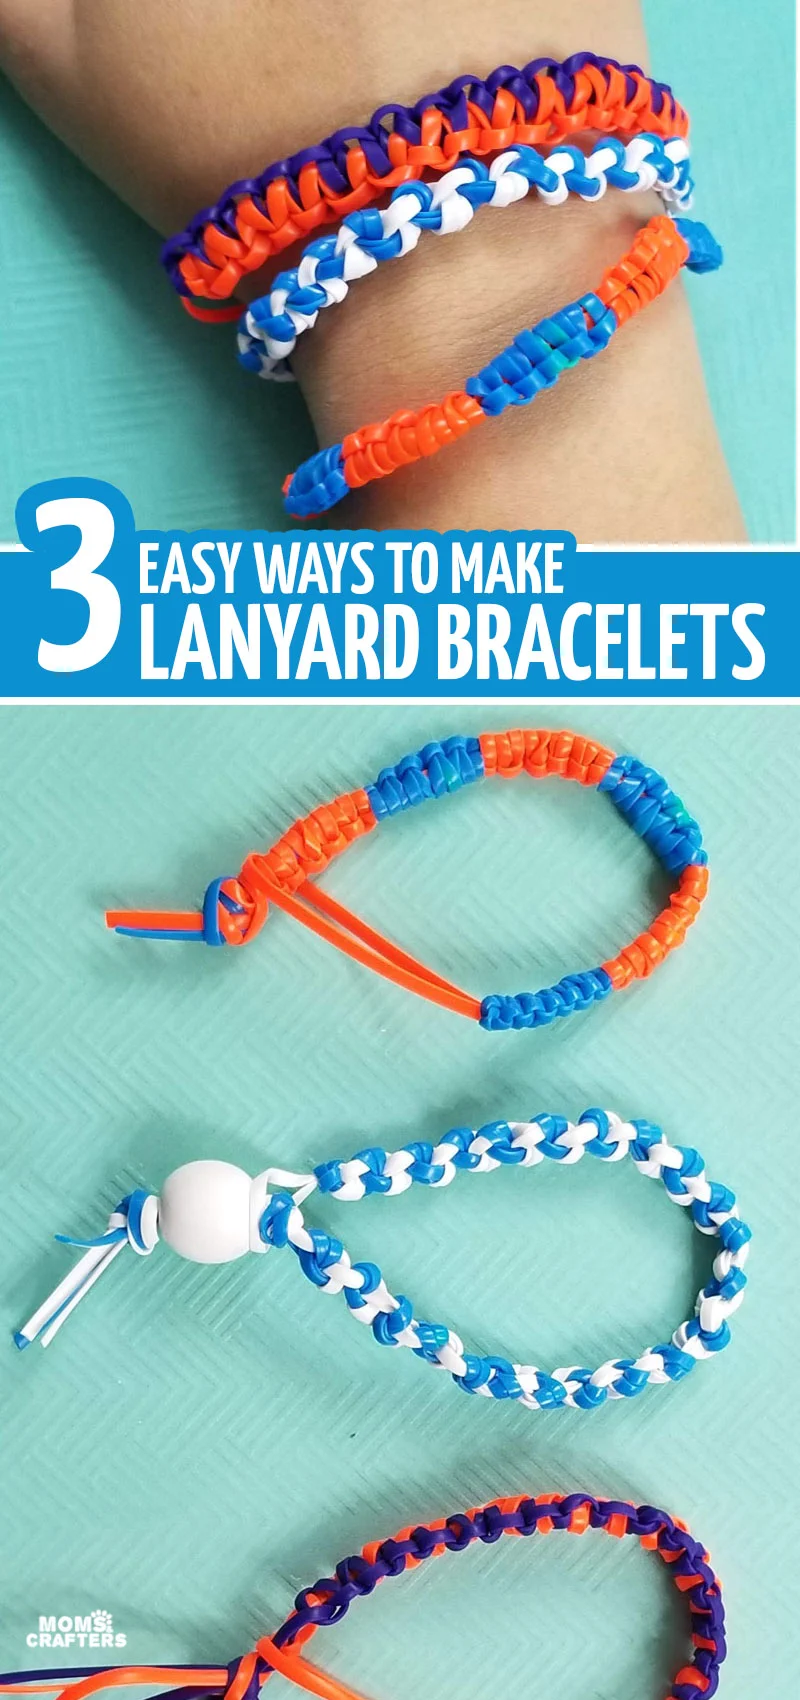 Want to learn how to make a gimp bracelet? These three lanyard knots are flexible and perfect for making bracelets! This fun boondoggle idea is perfect for summer camps and a great craft idea for tween boys and girls - and even kids!